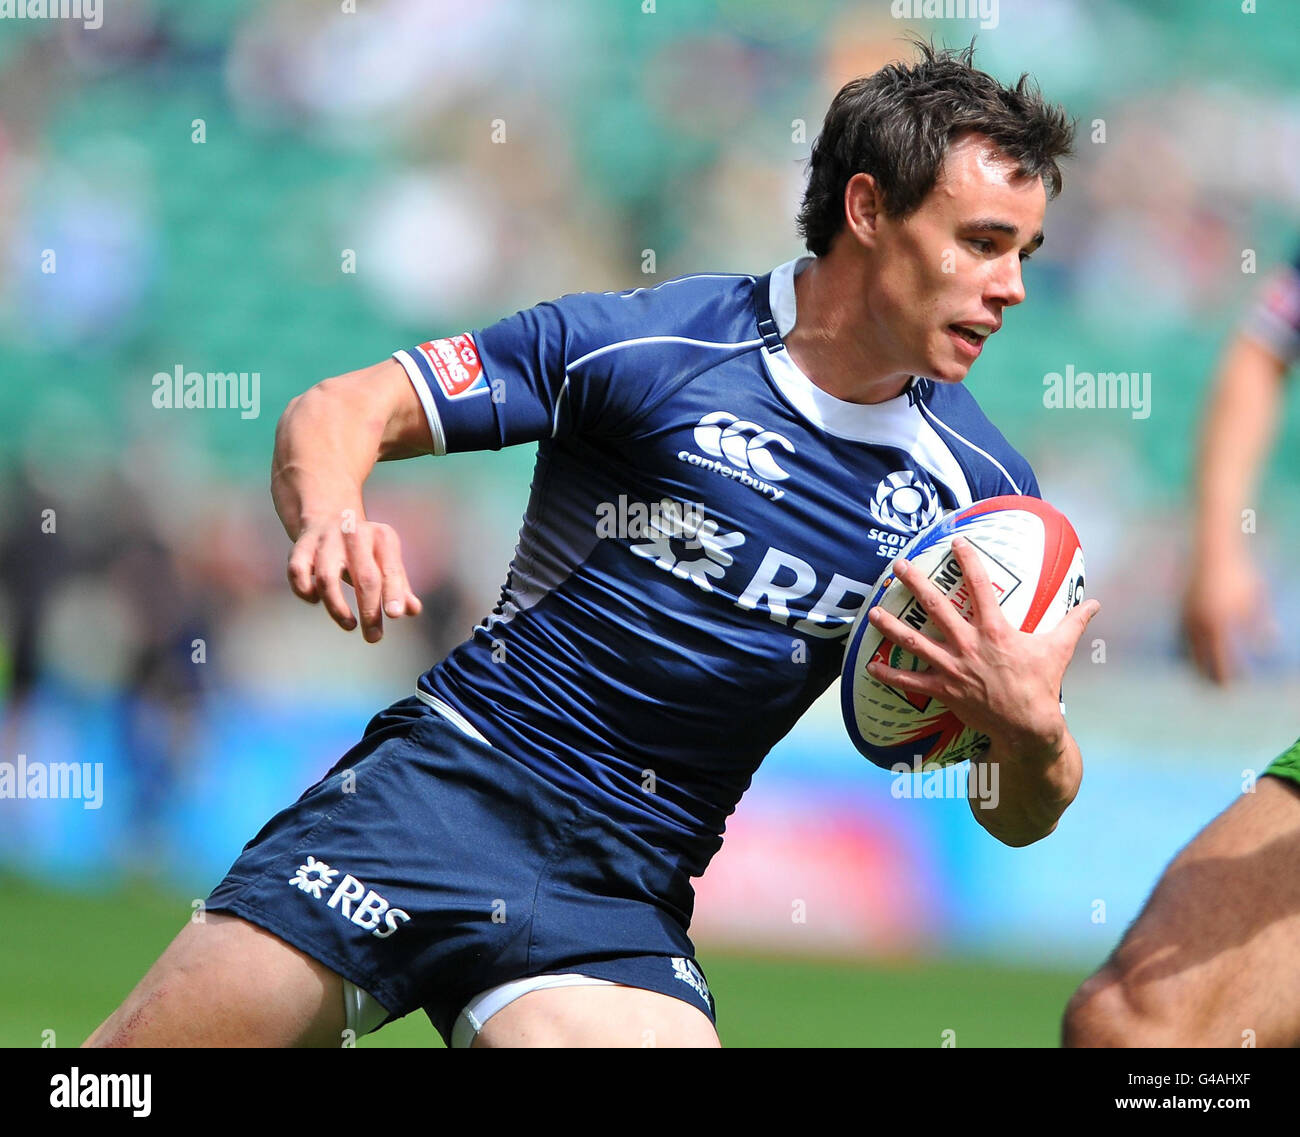 Rugby Union - IRB Emirates Airline London Sevens - Day Two - Twickenham. Scotland's Lee Jones in action during match 26 of the IRB Emirates Airline London Sevens at Twickenham Stadium, London. Stock Photo